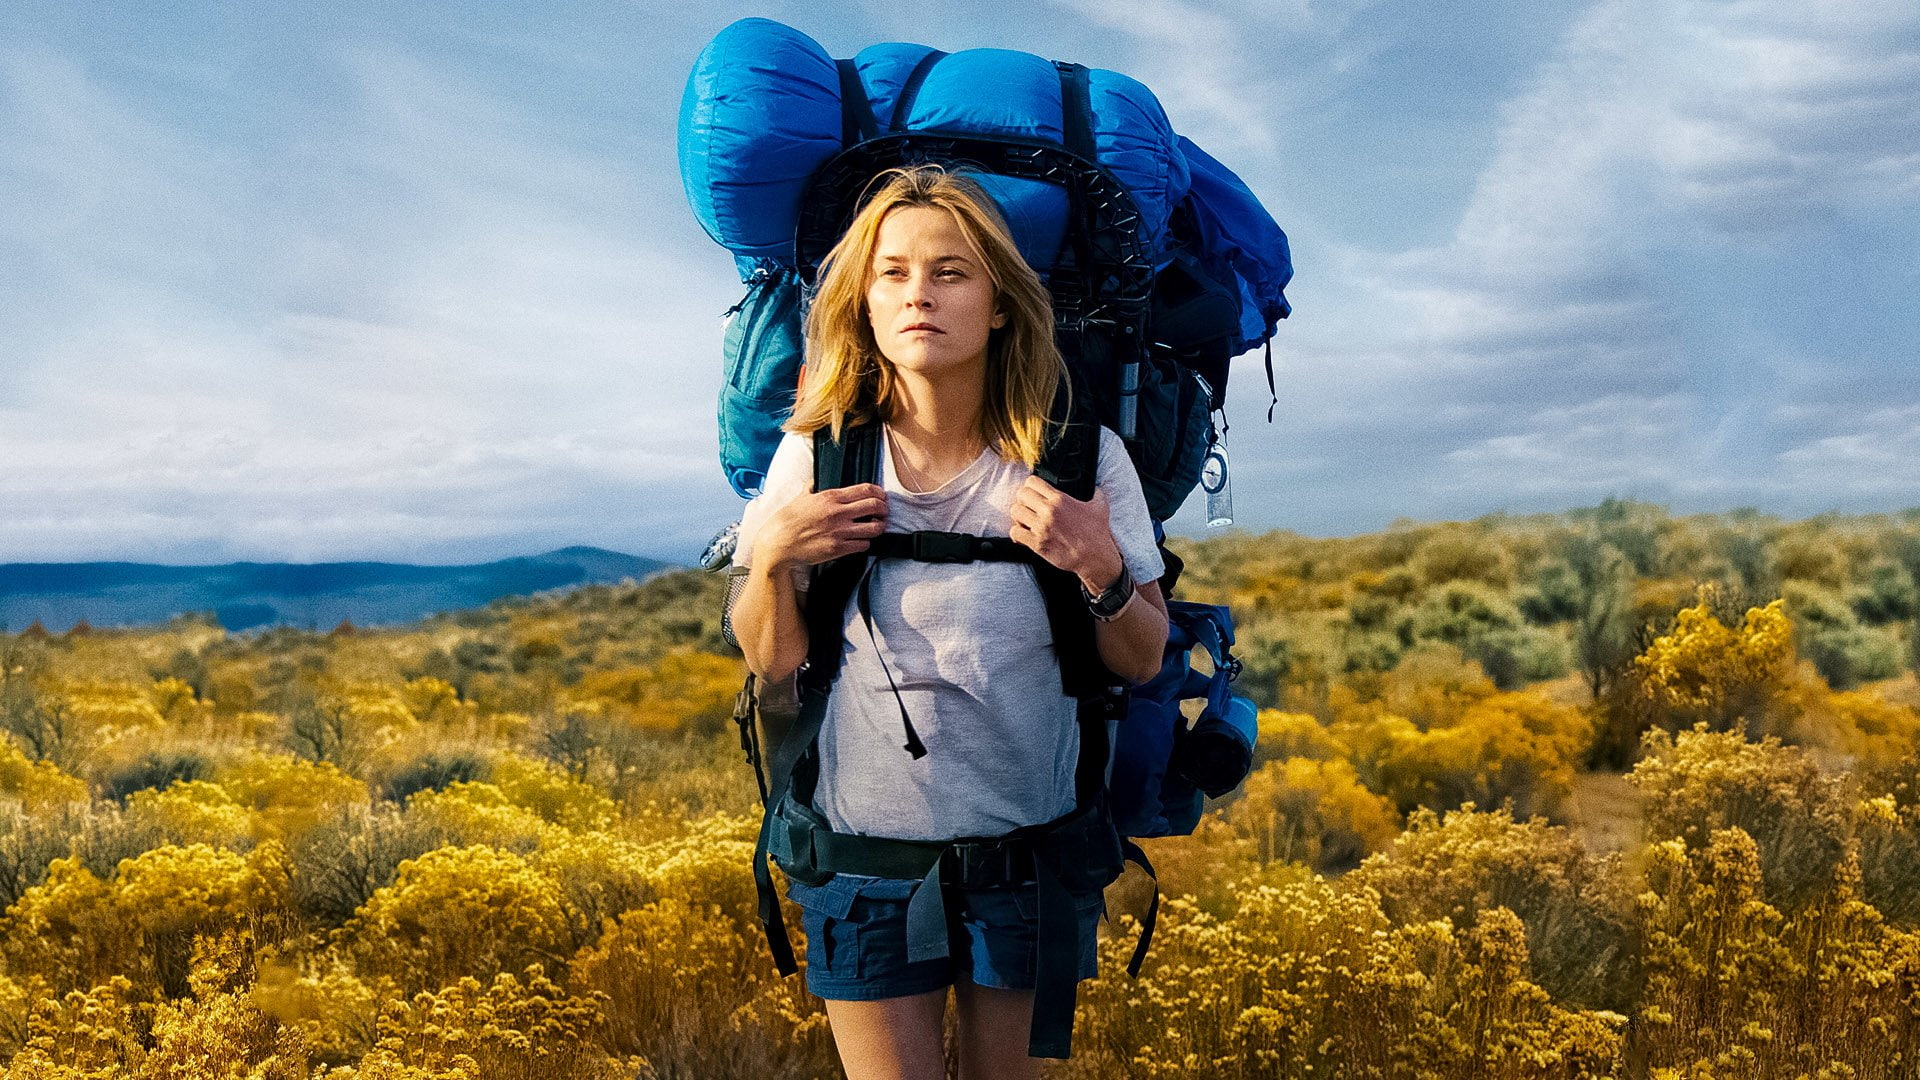 Movie, Wild, Reese Witherspoon